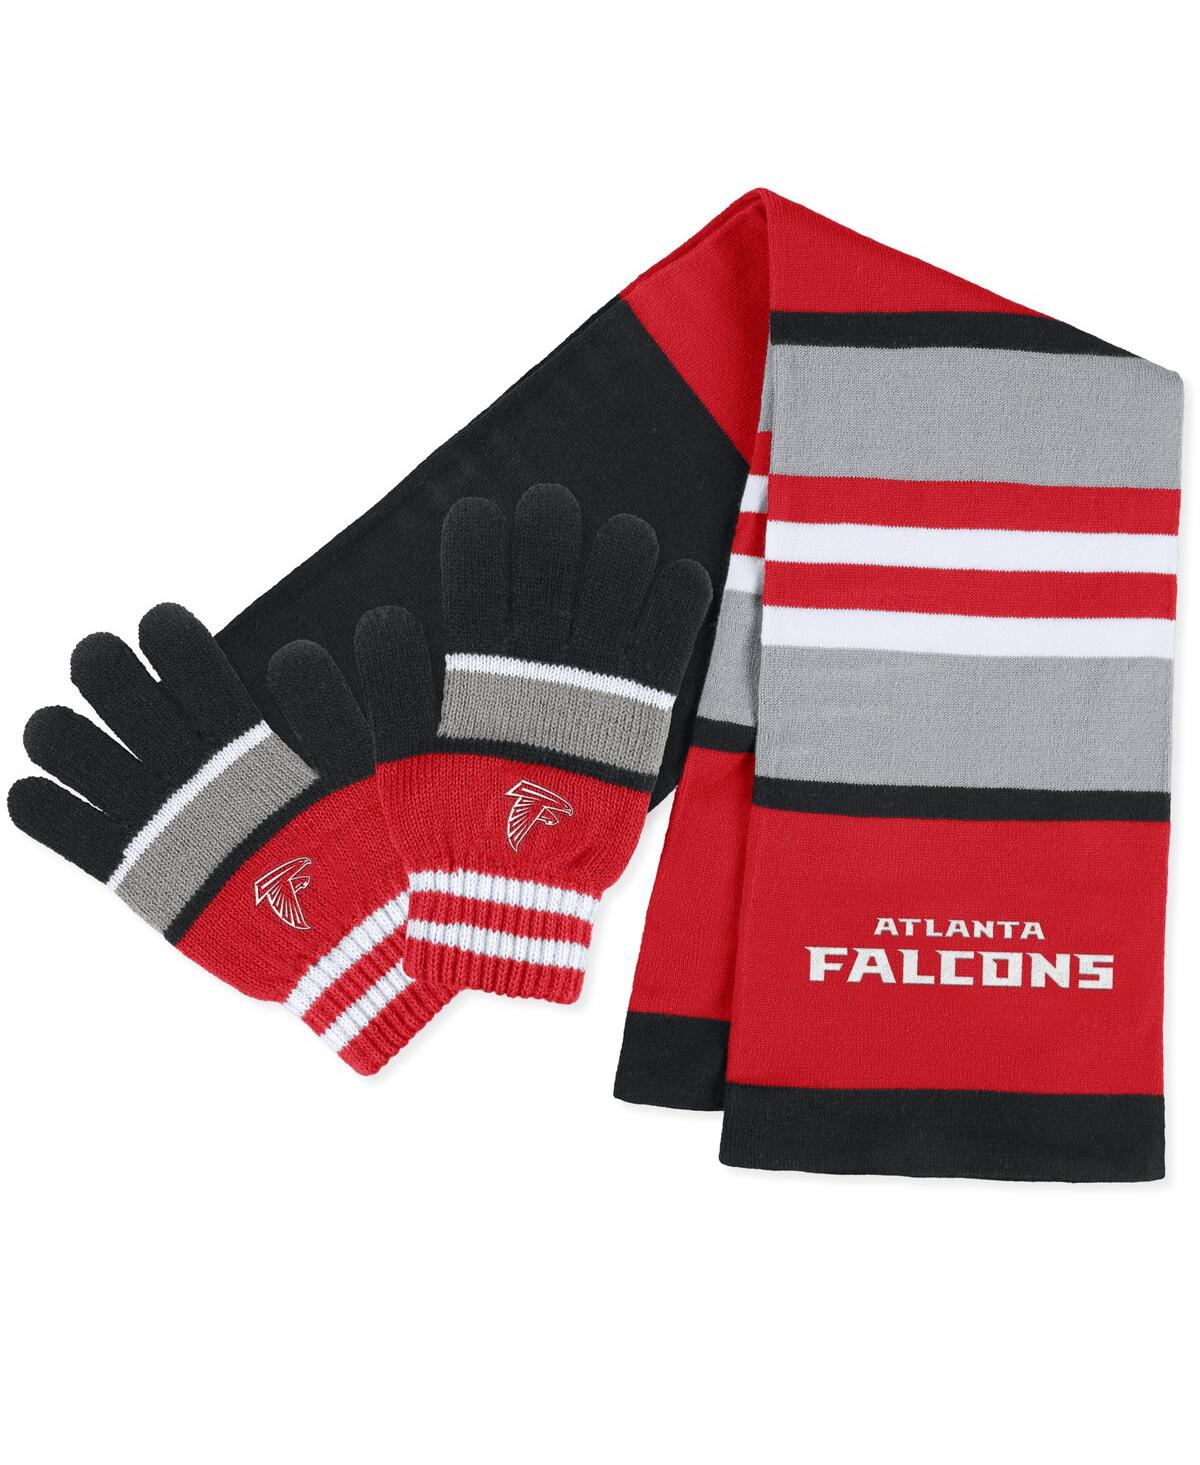 Wear By Erin Andrews Women's  Atlanta Falcons Stripe Glove And Scarf Set In Red,black